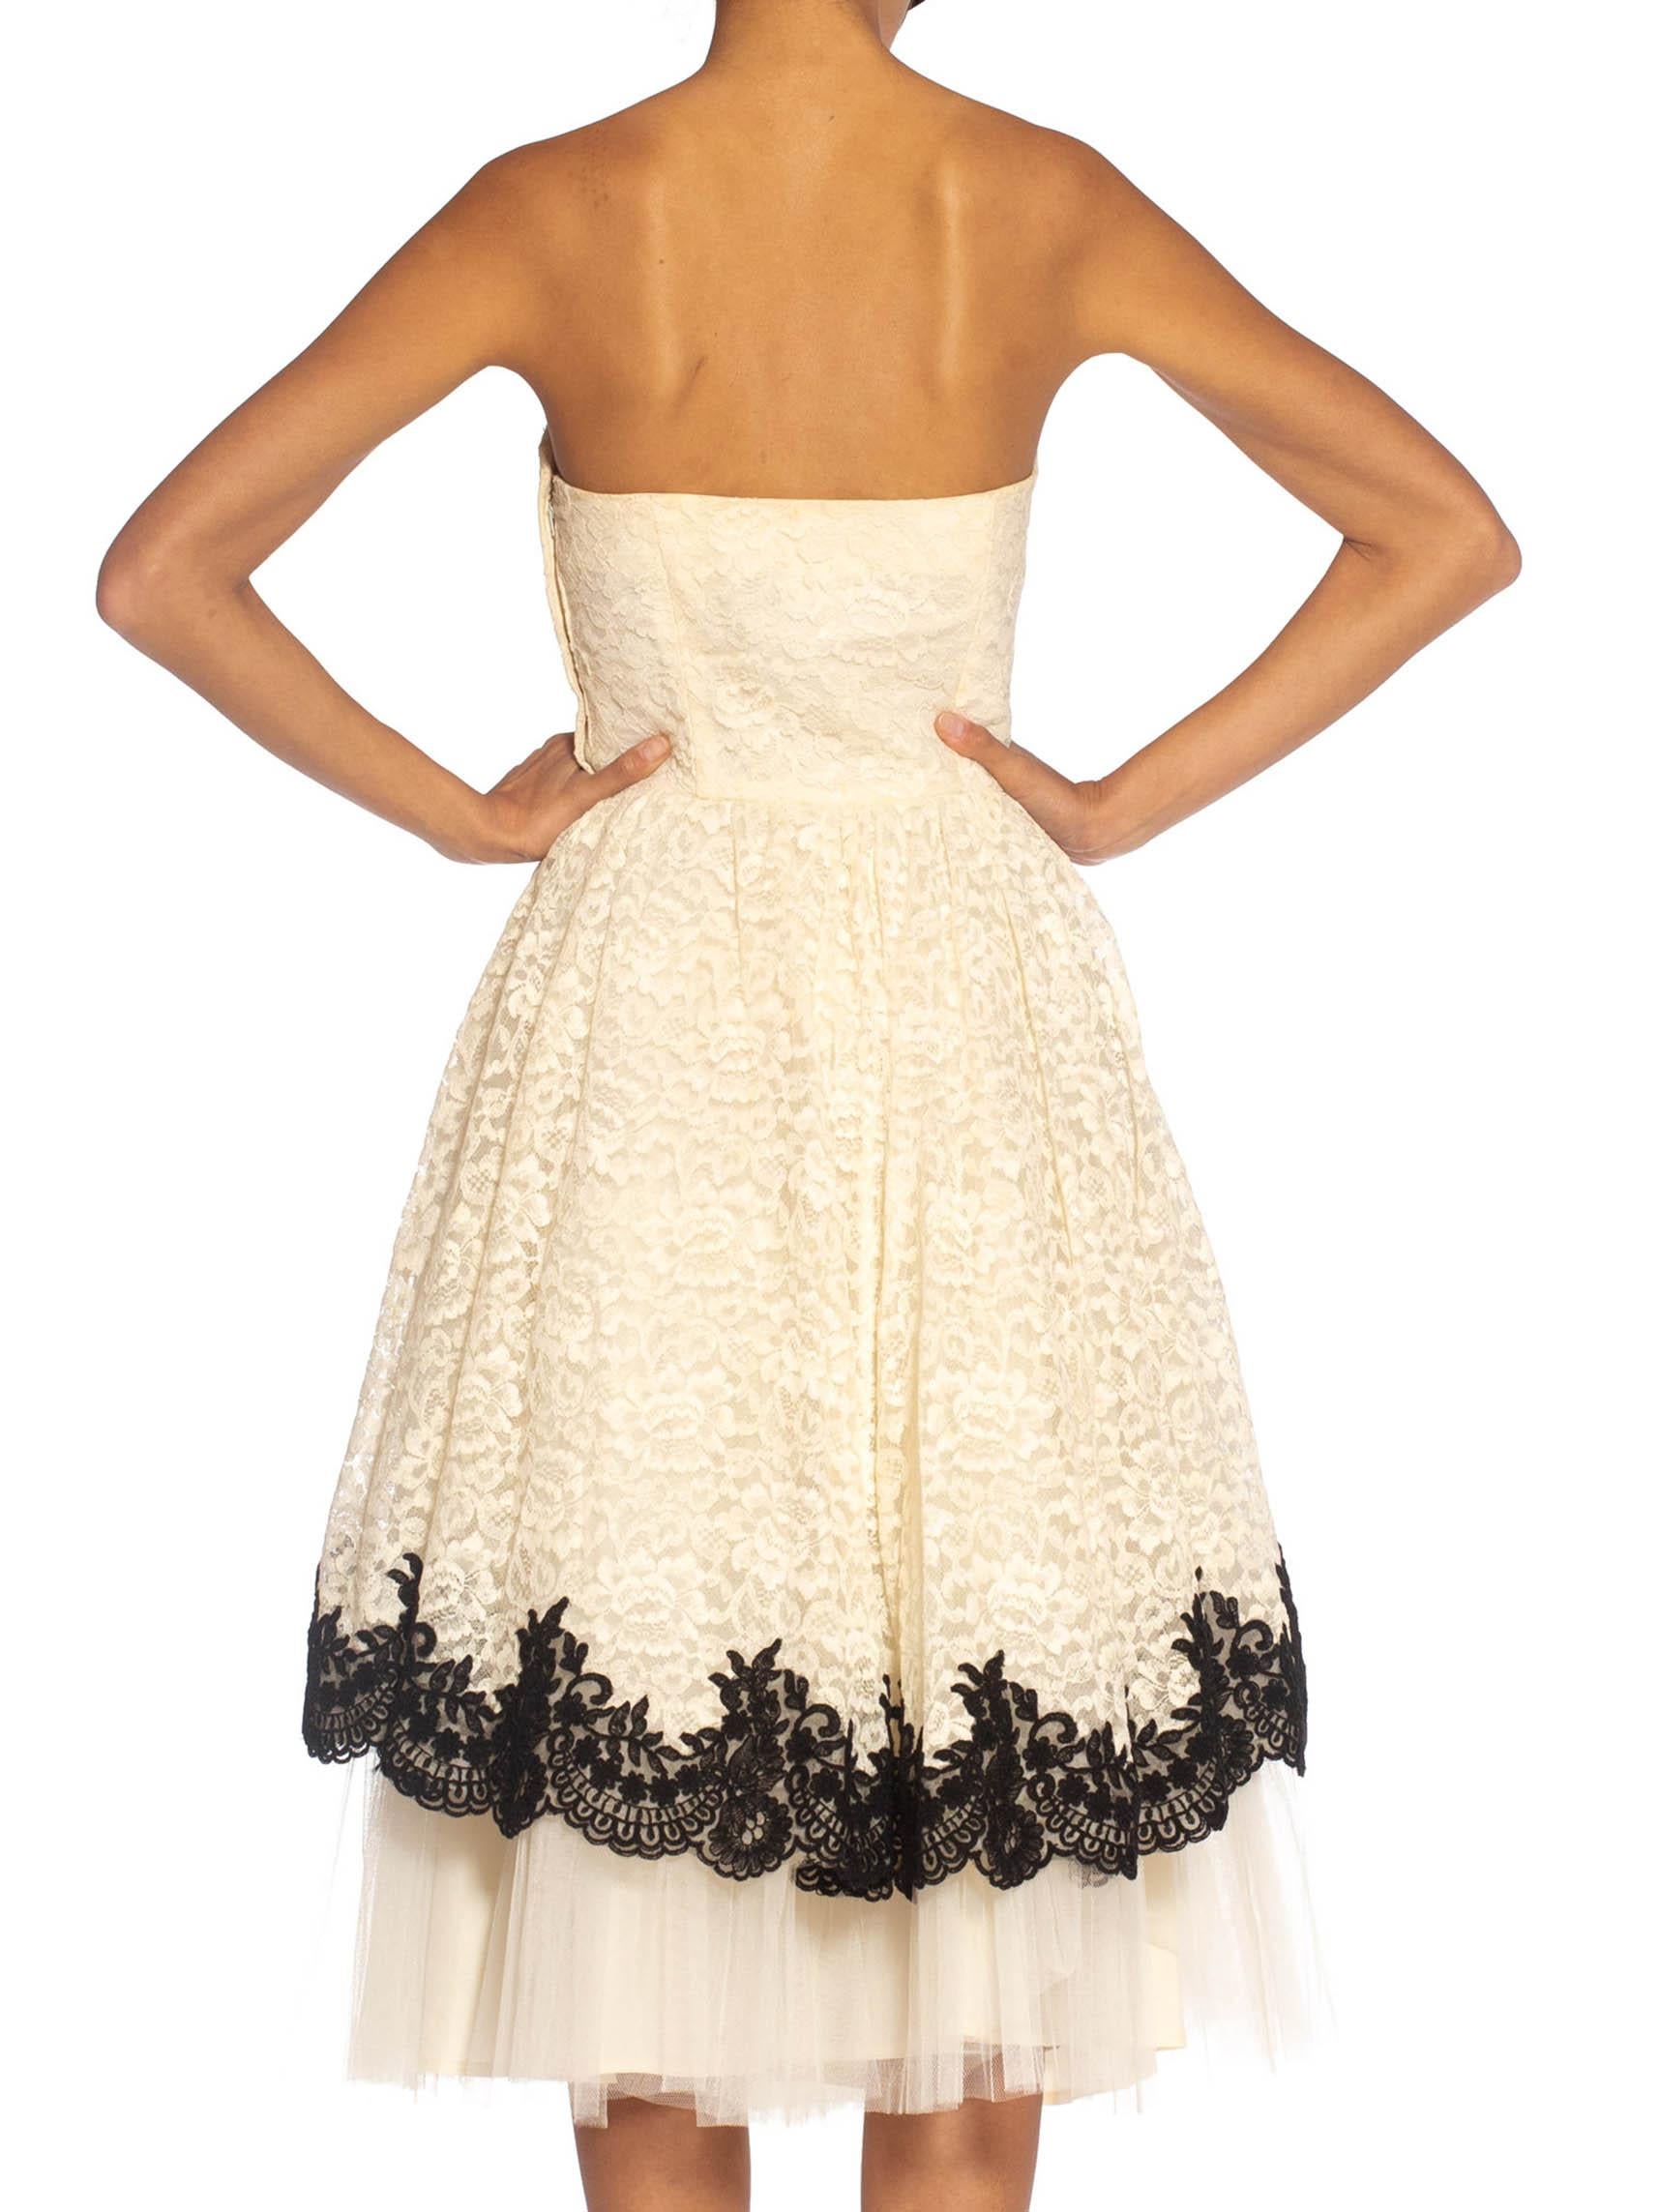 cream dress with black lace